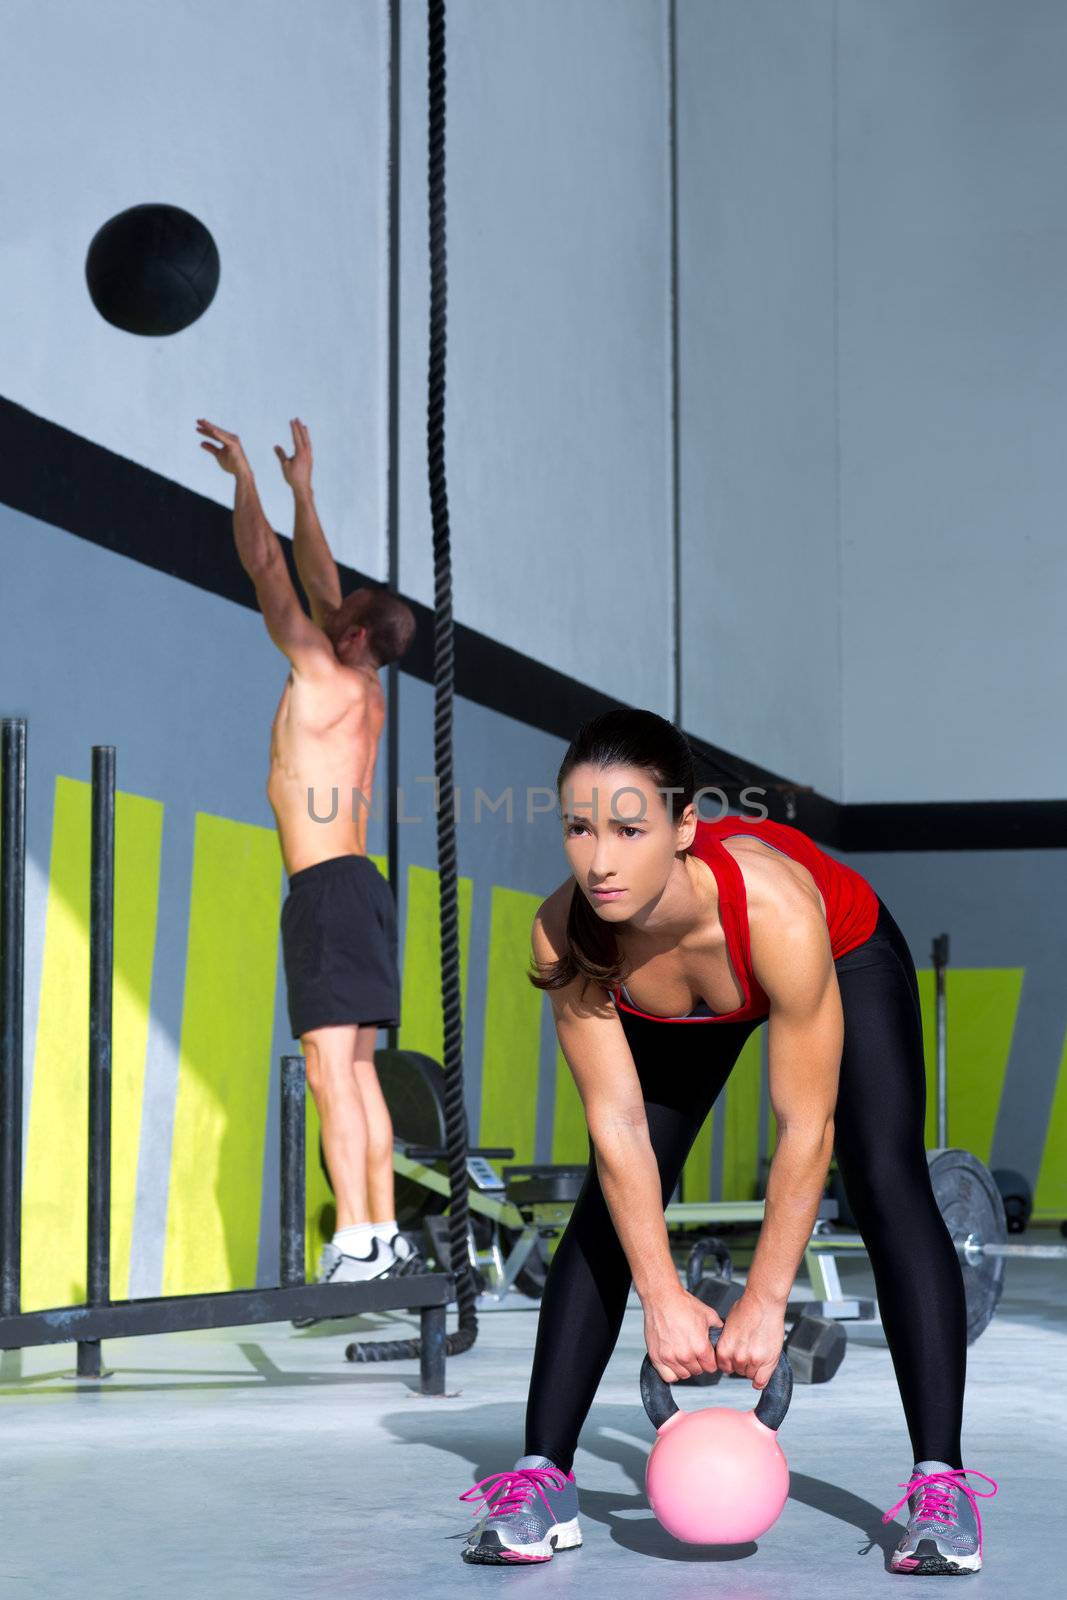 Crossfit gym Kettlebell woman and jumping wall ball man workout at gym